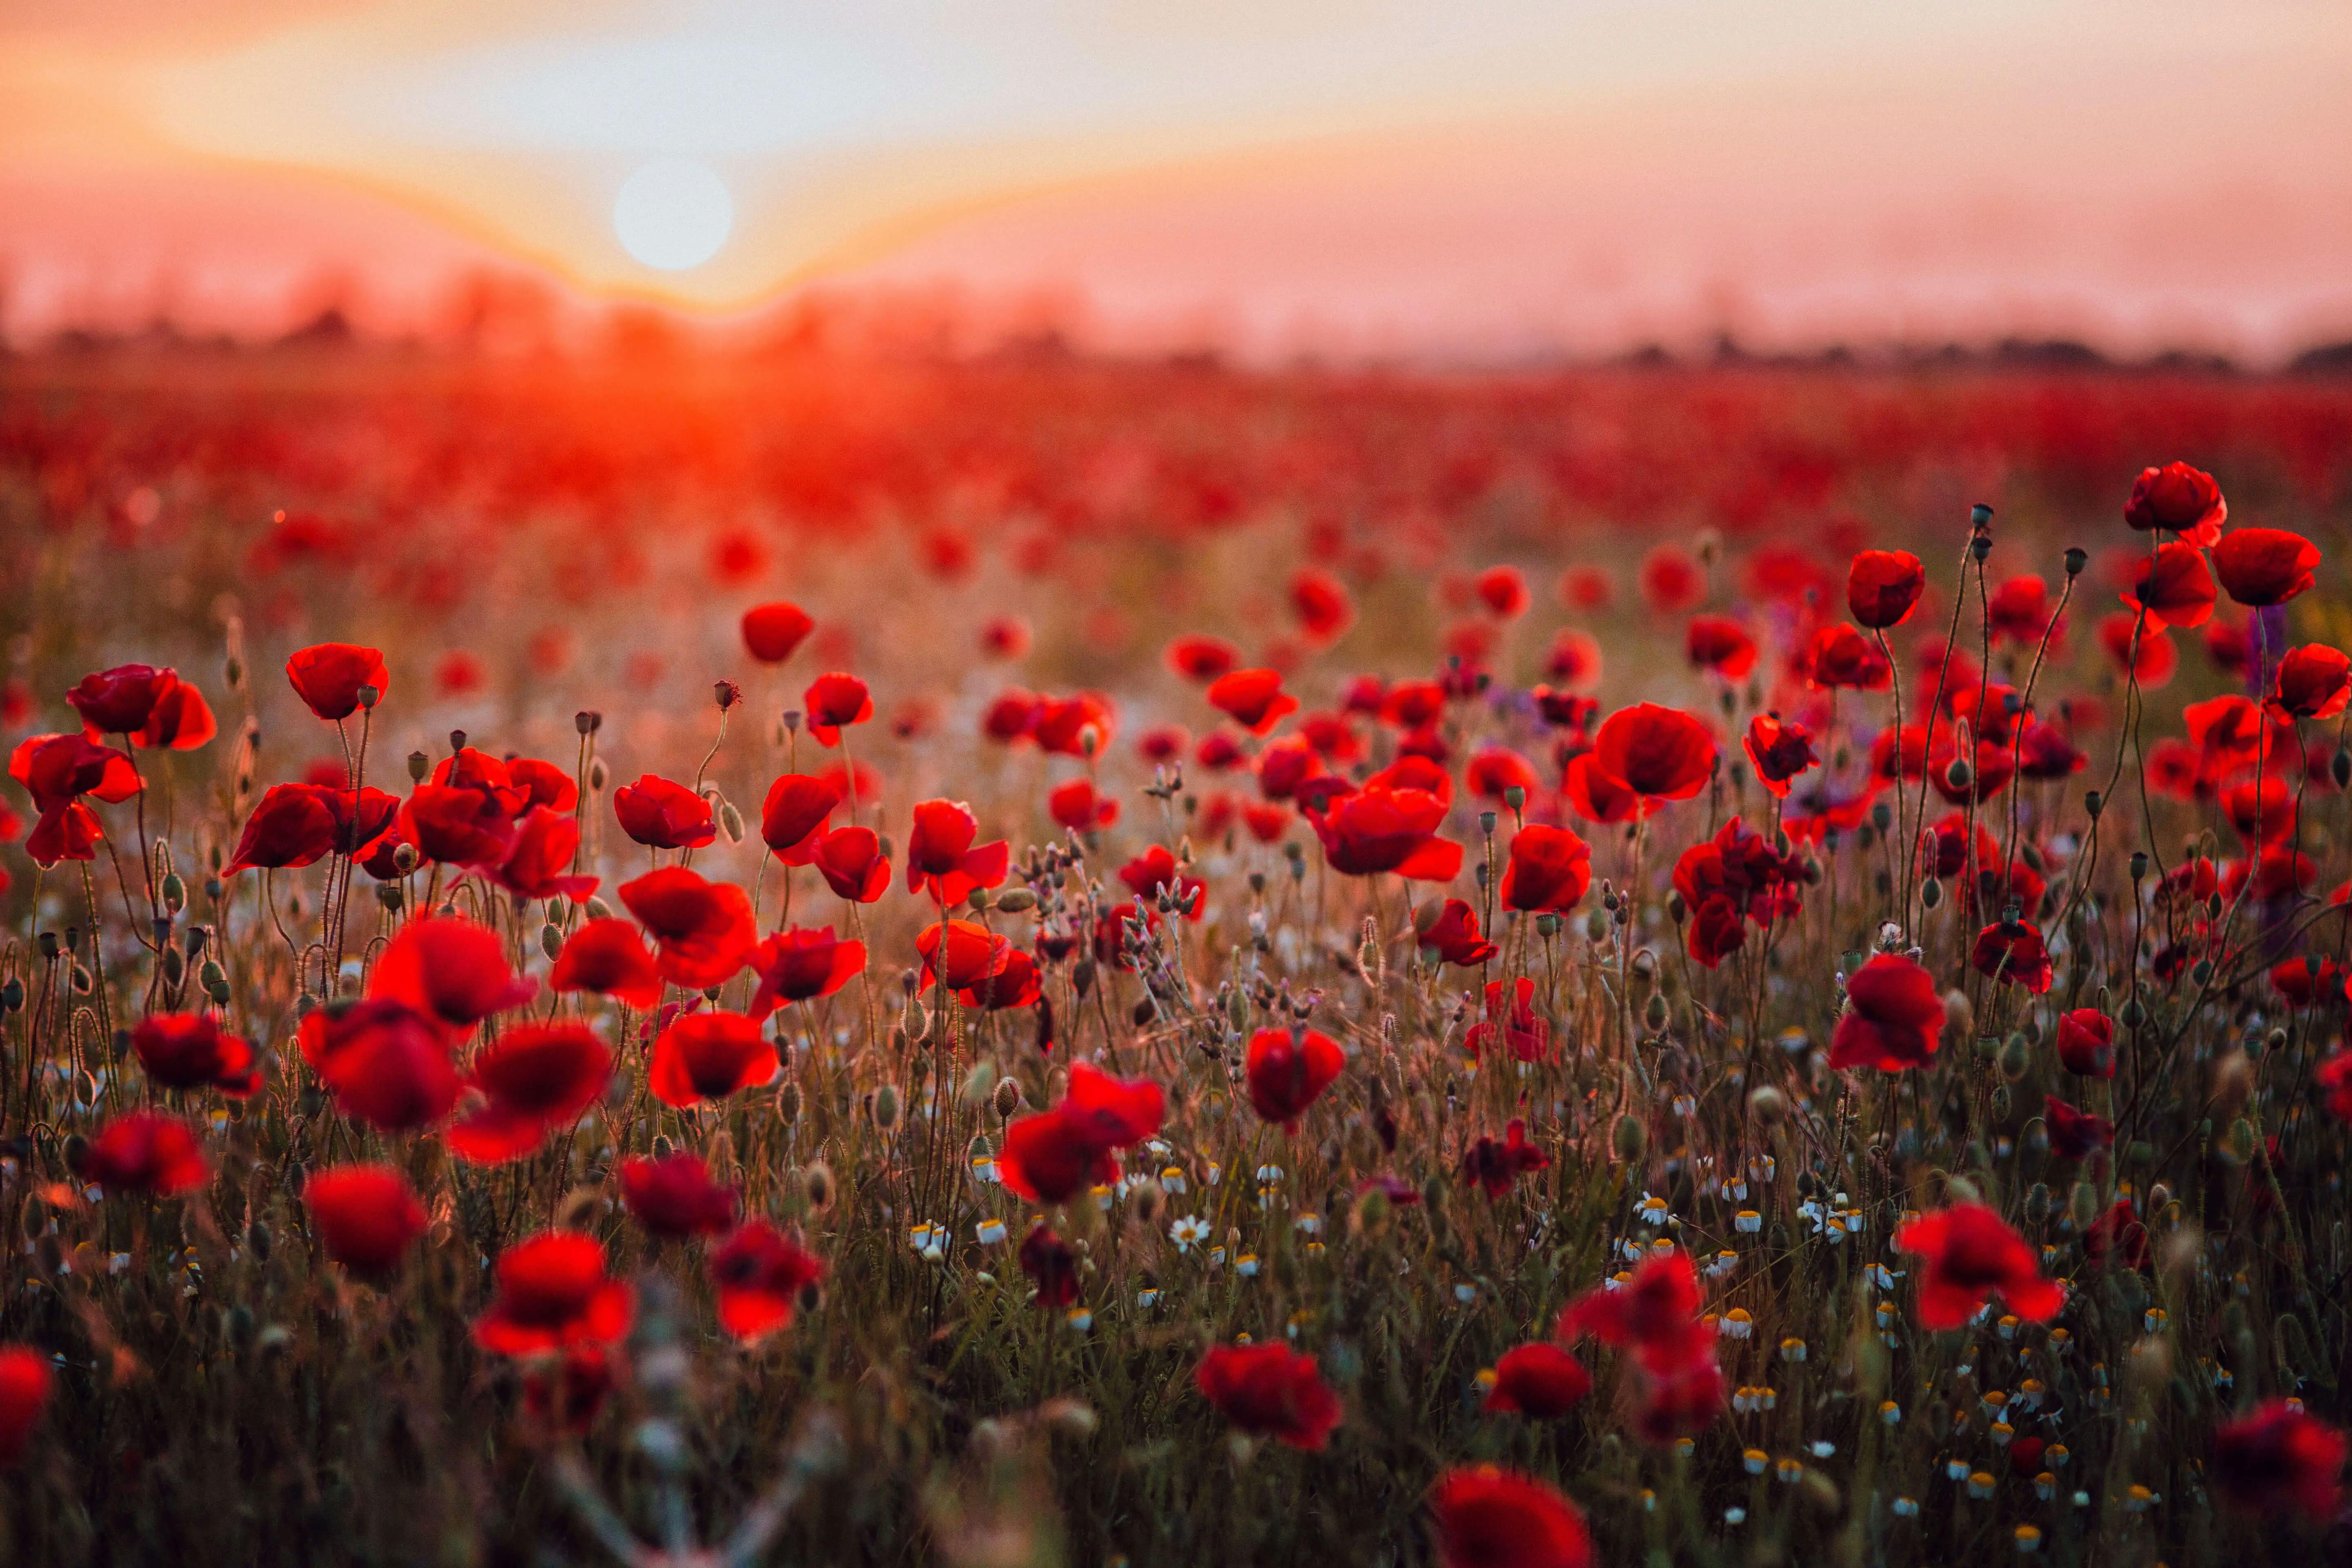 Field of red flowers with a beautiful sunset in the background.